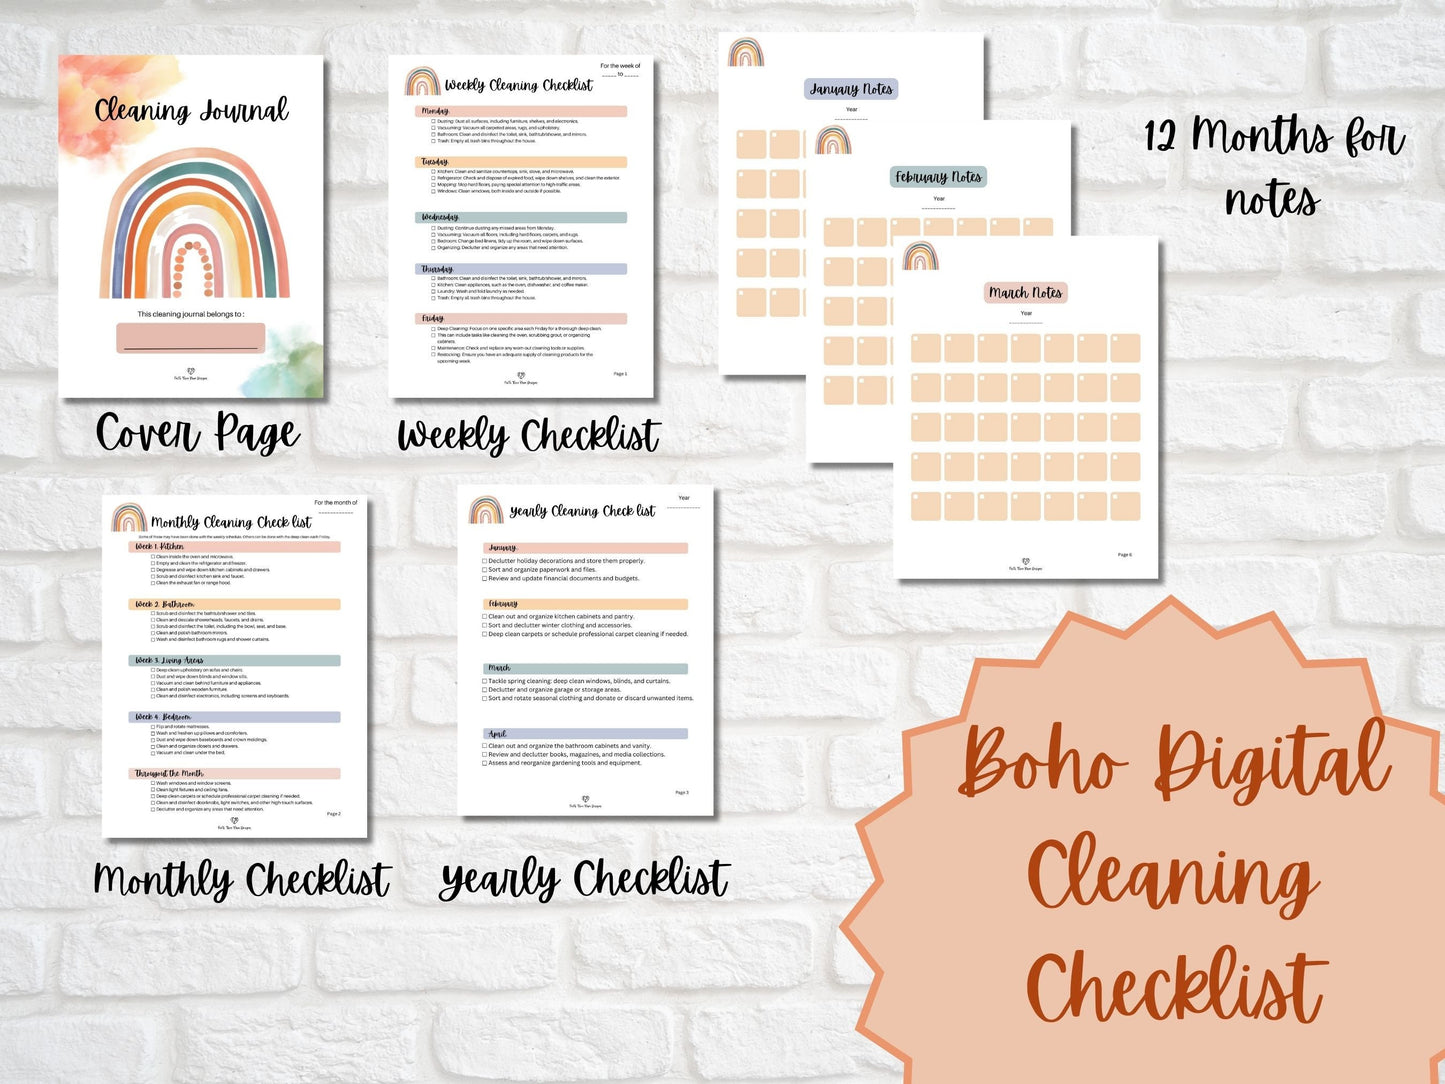 Boho-Inspired Daily, Weekly, Monthly Cleaning Checklist for a Tidy Home, Cleaning Checklist, Cleaning Schedule, Cleaning Planner